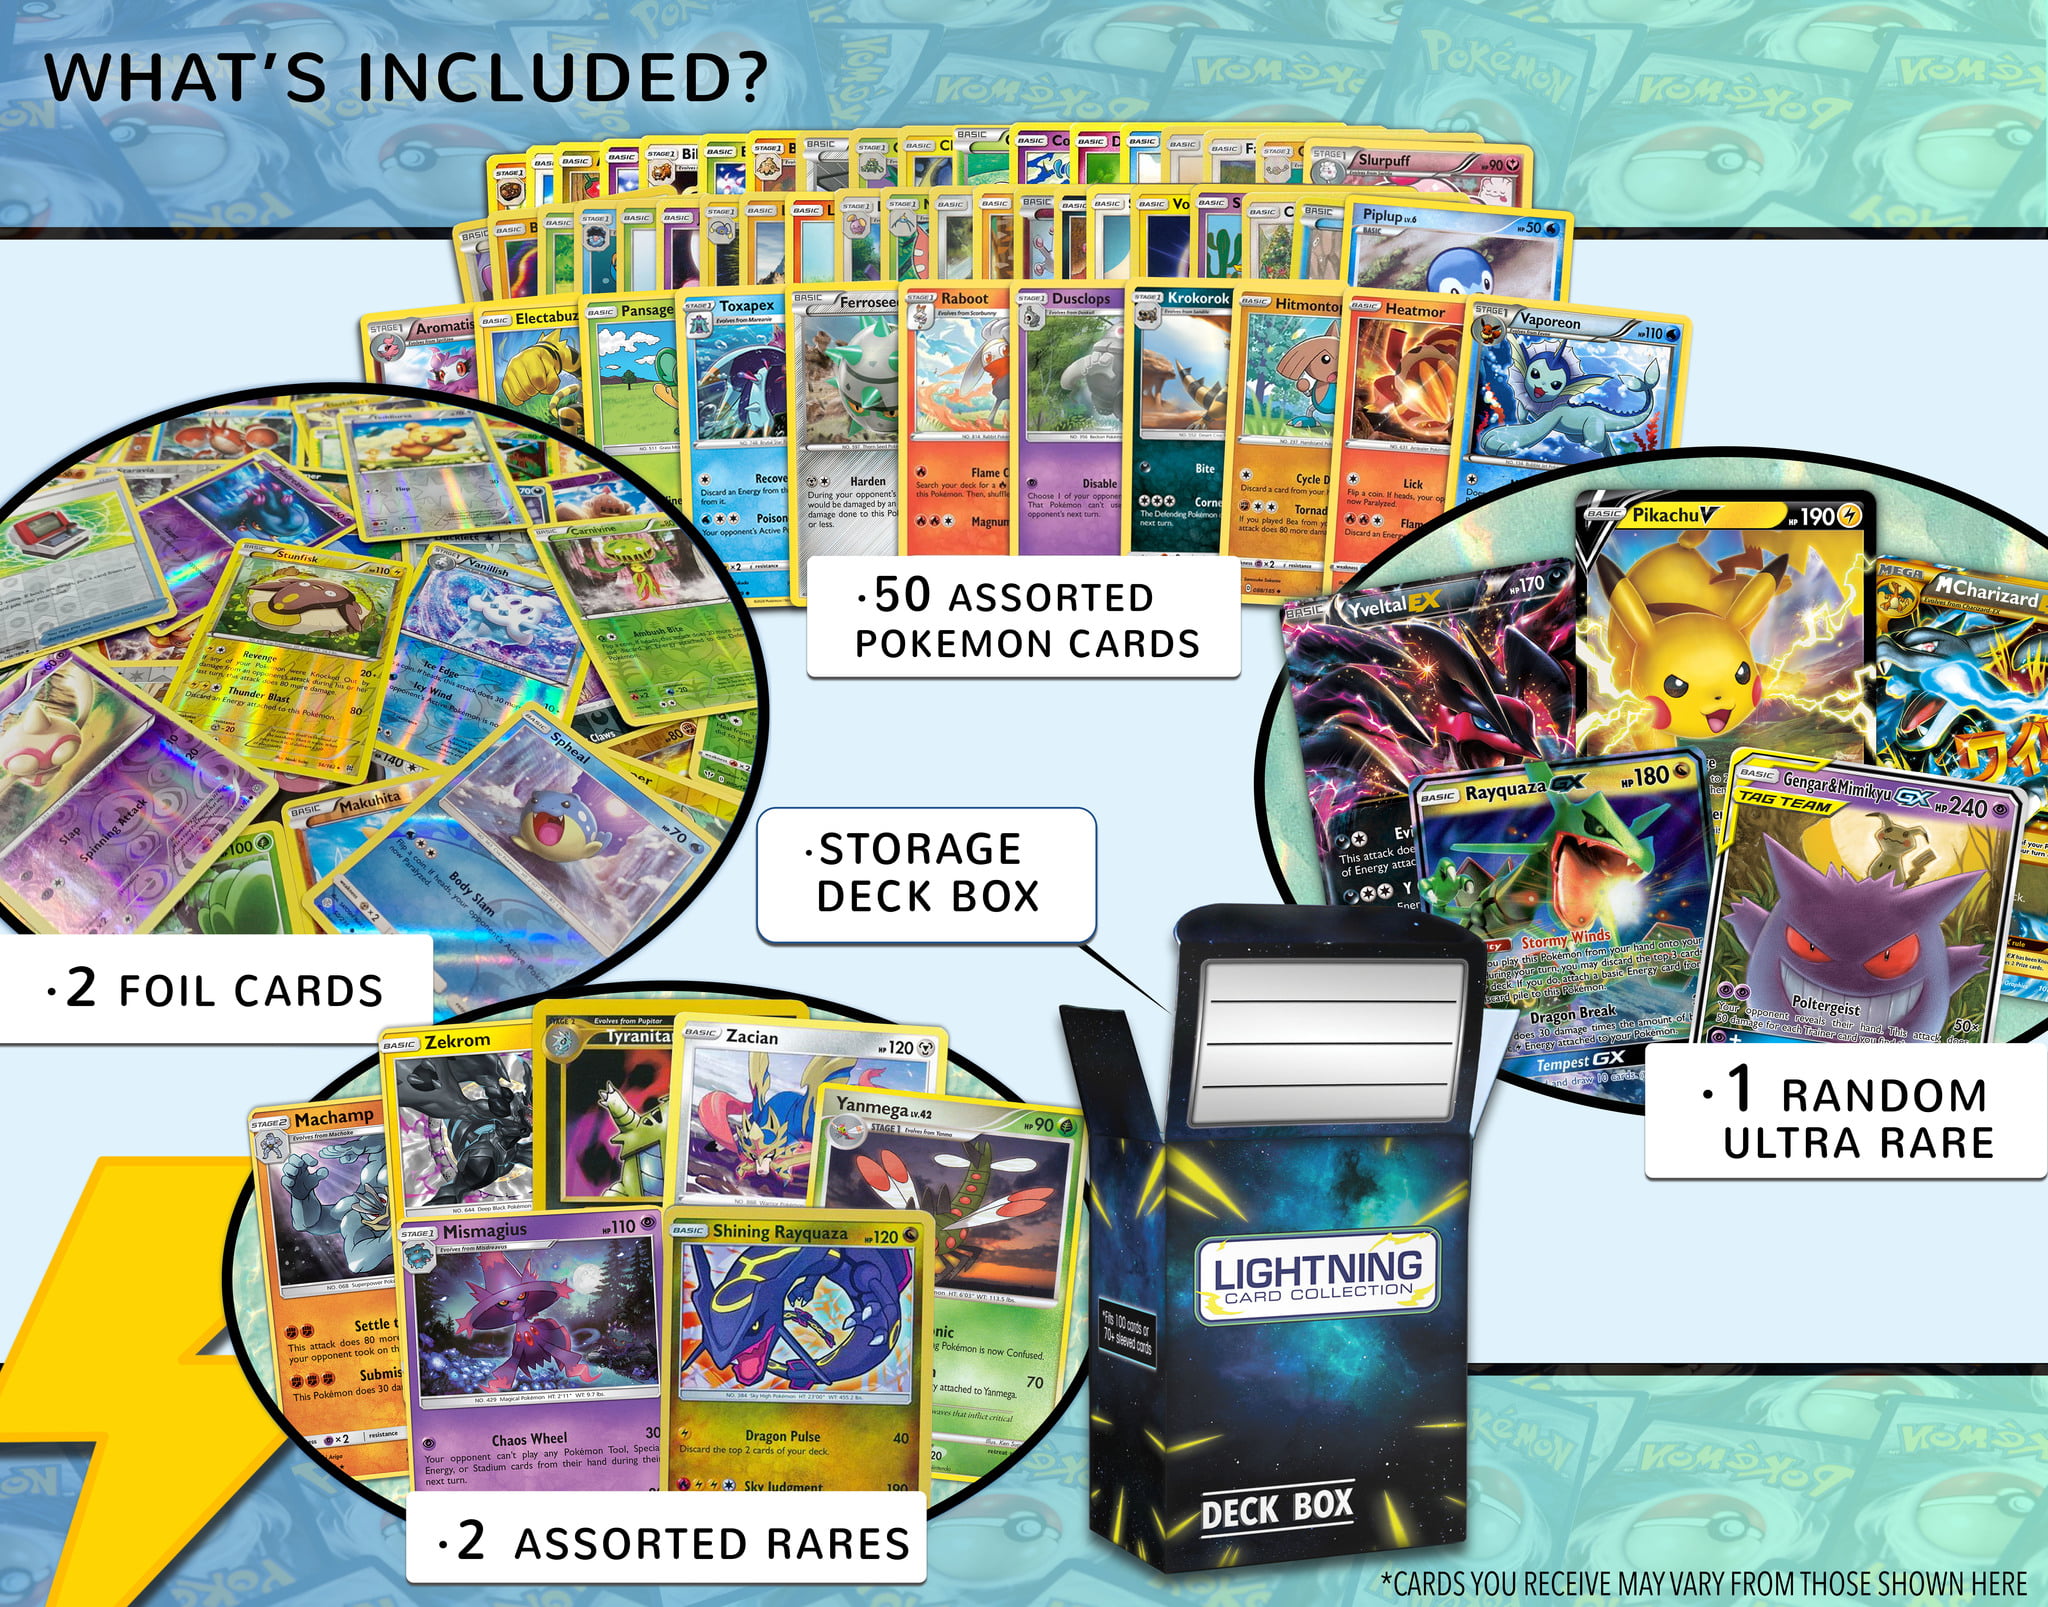 Lightning Card Collection's Ultra Rare Bundle- 50 Cards That includes a  Foil Card, Rare Card, and a Random Legendary Ultra-Rare Card and a Deck Box